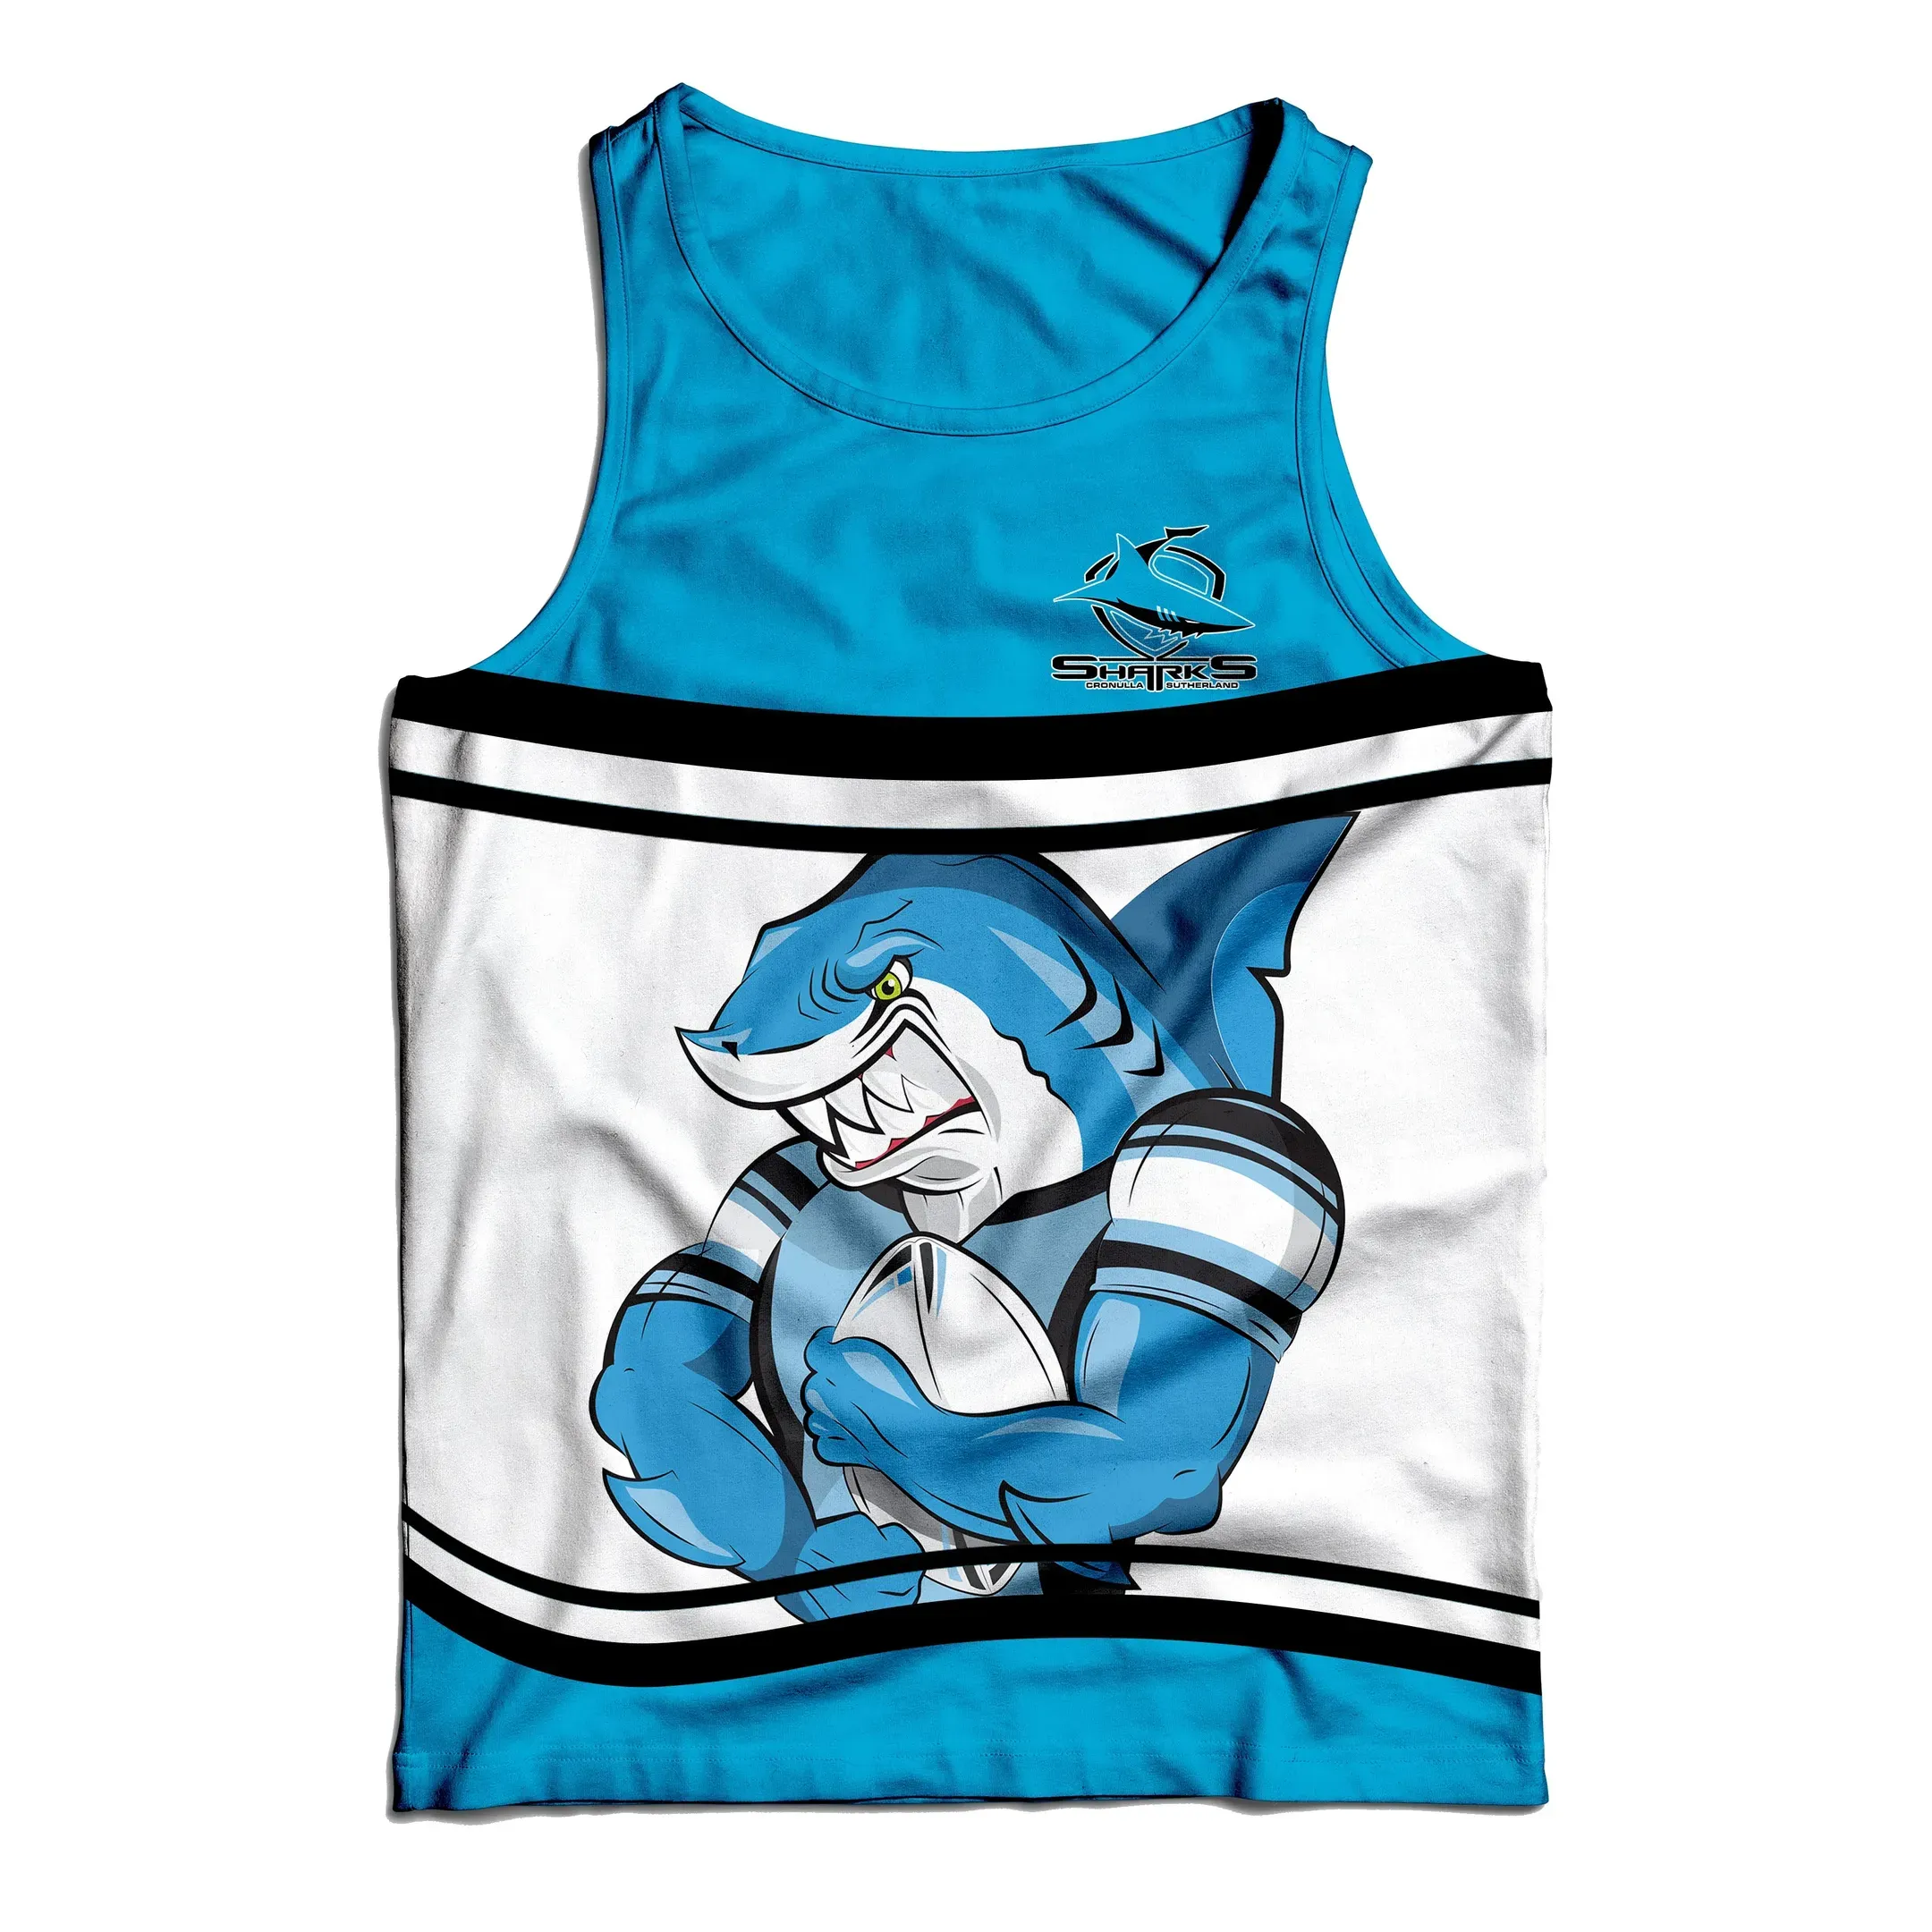 Cronulla-Sutherland Sharks Tank Top NRL Personalized